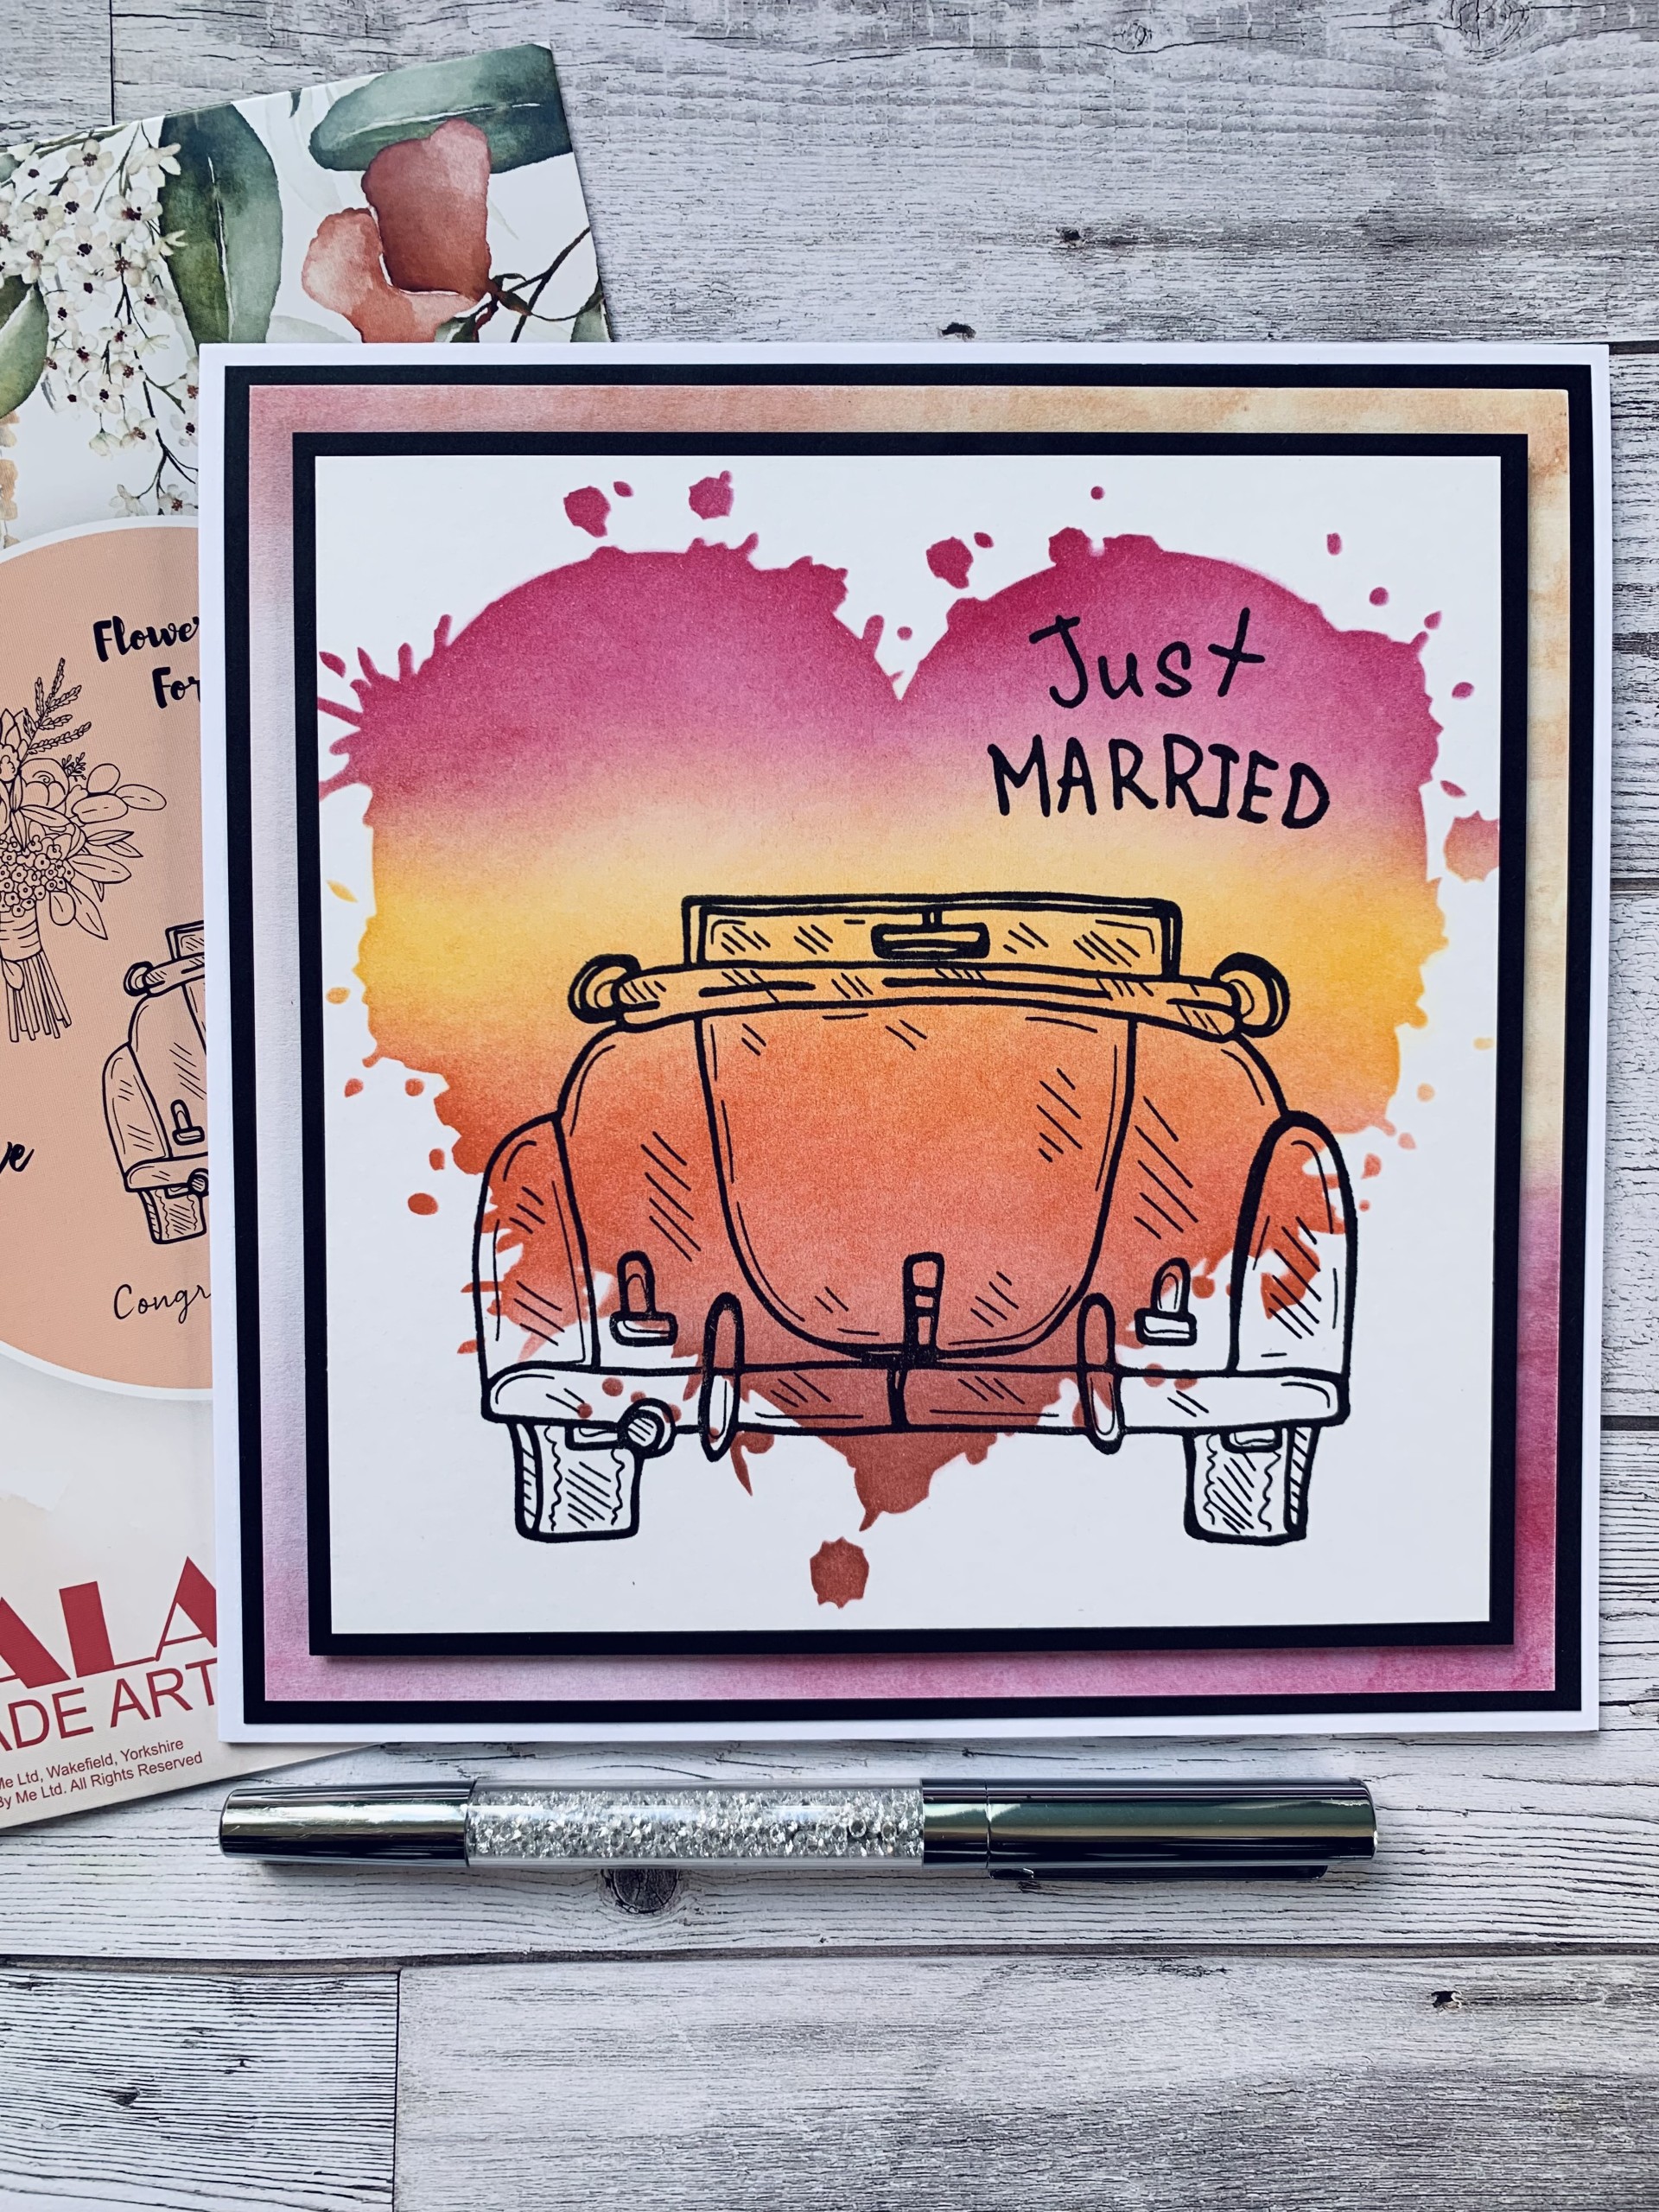 Just Married (card created by Elaine)